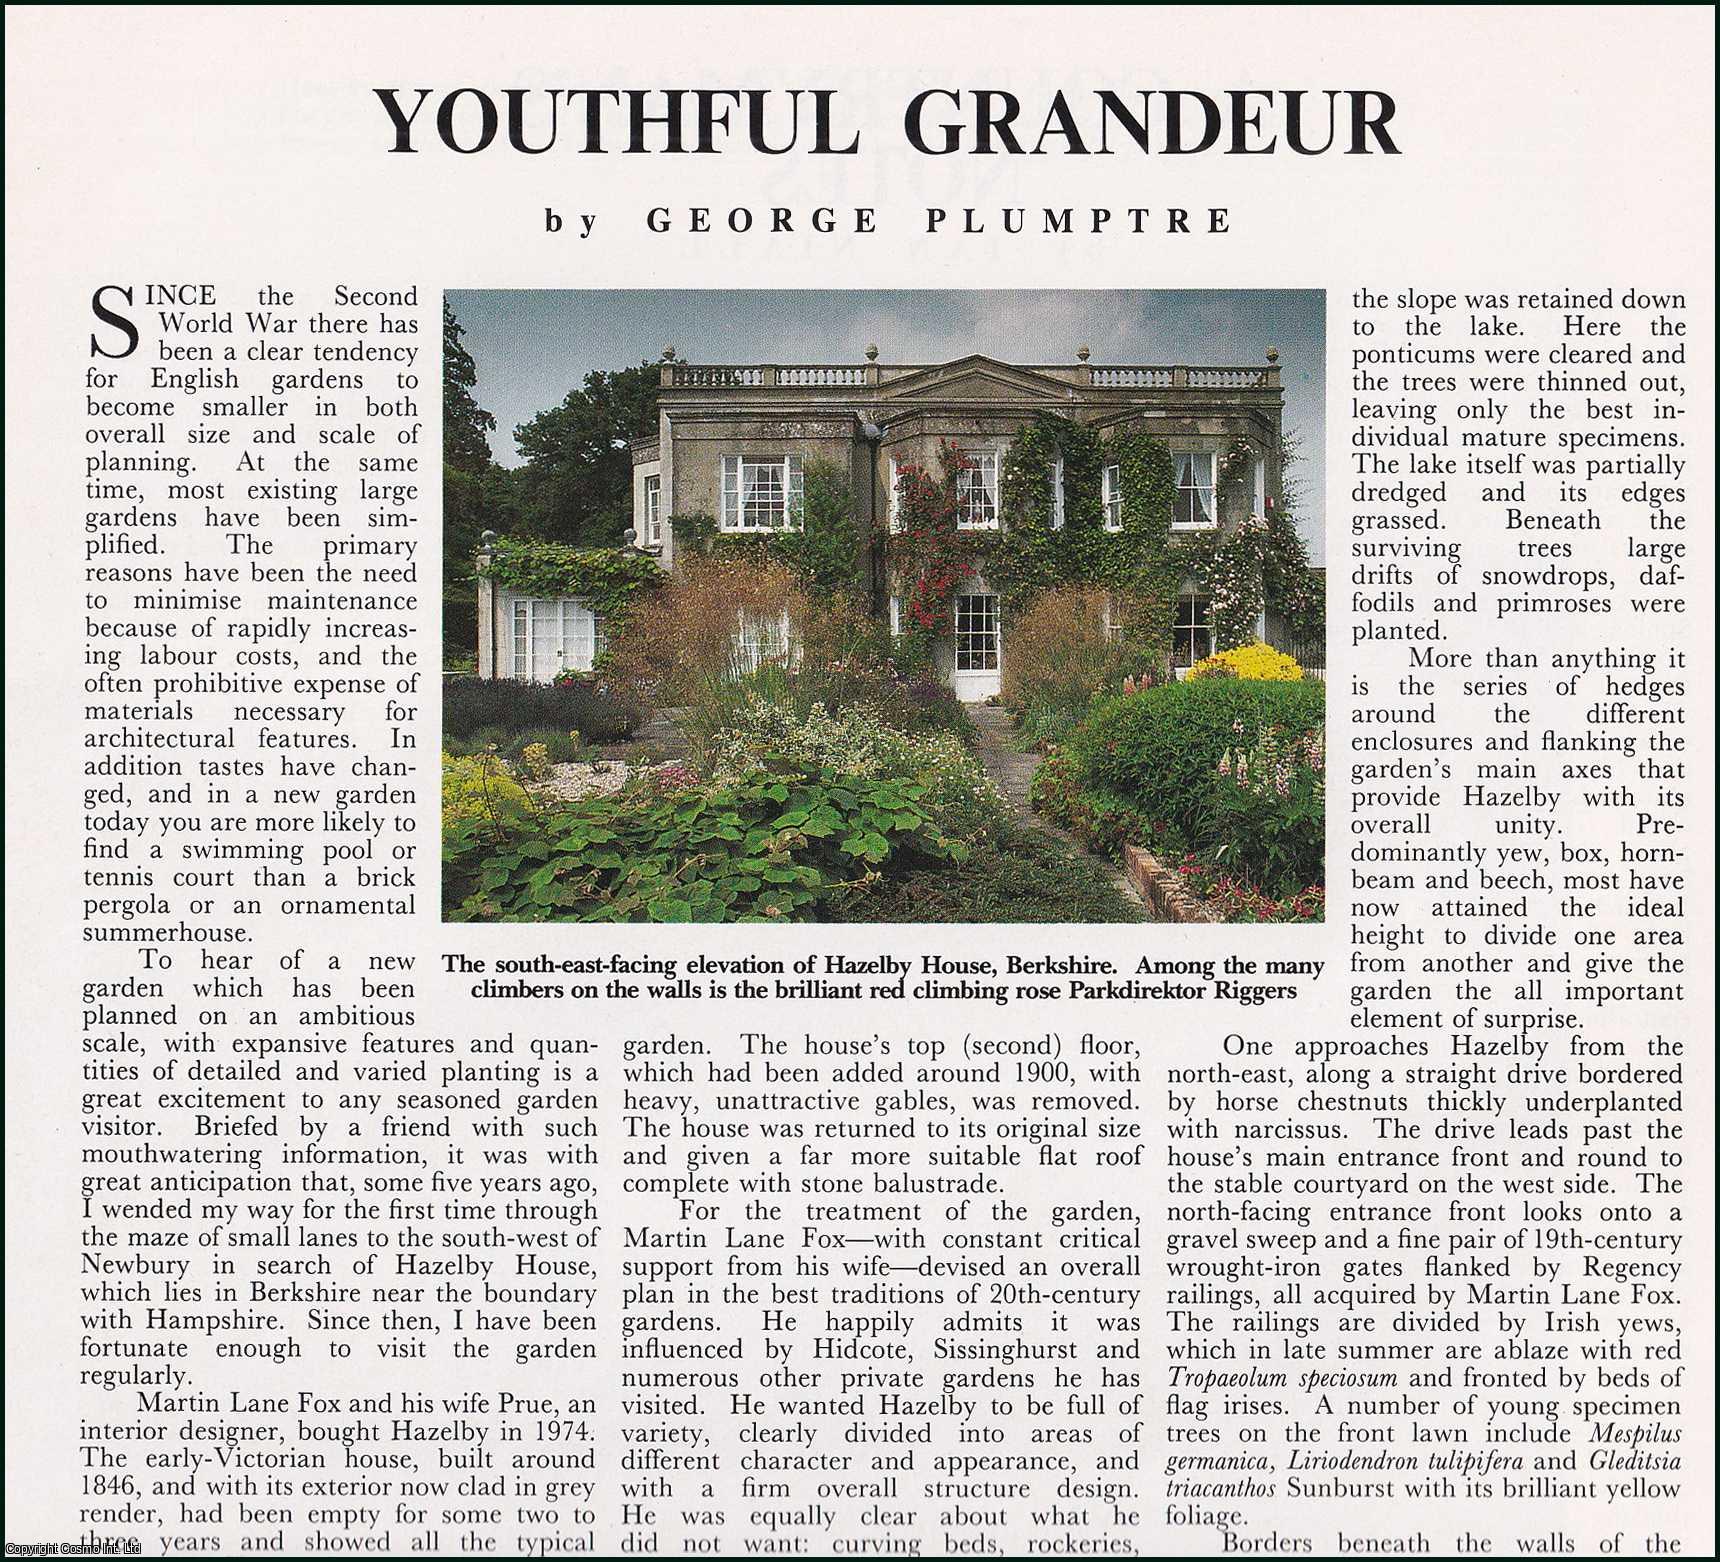 George Plumptre - Youthful Grandeur: Hazelby House. Several pictures and accompanying text, removed from an original issue of Country Life Magazine, 1988.